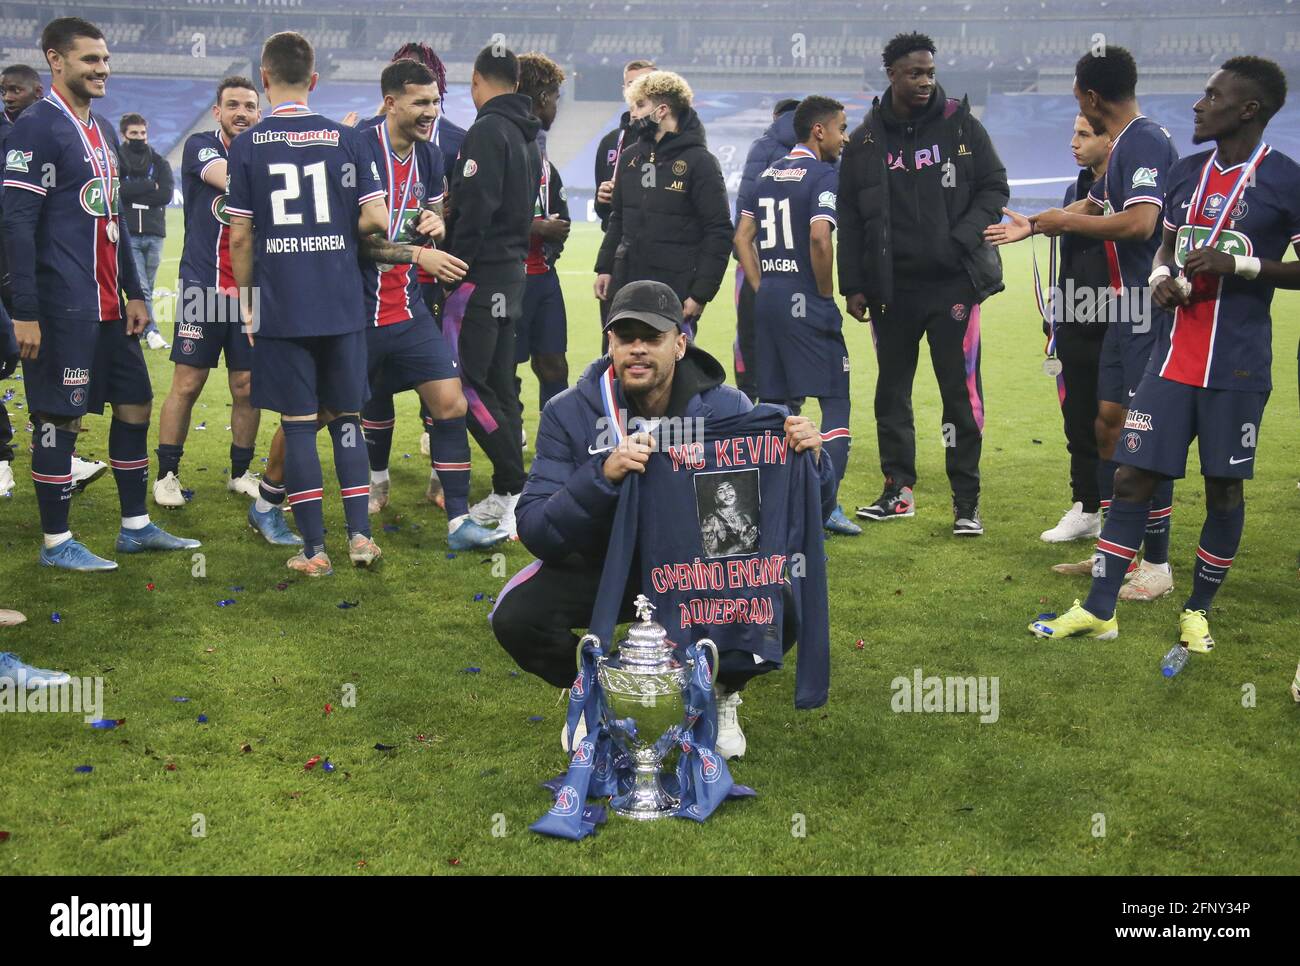 Neymar Jr of PSG celebrates the victory following the French Cup Final  football match between AS Monaco (ASM) and Paris Saint-Germain PSG on May  19, 2021 at Stade de France in Saint-Denis